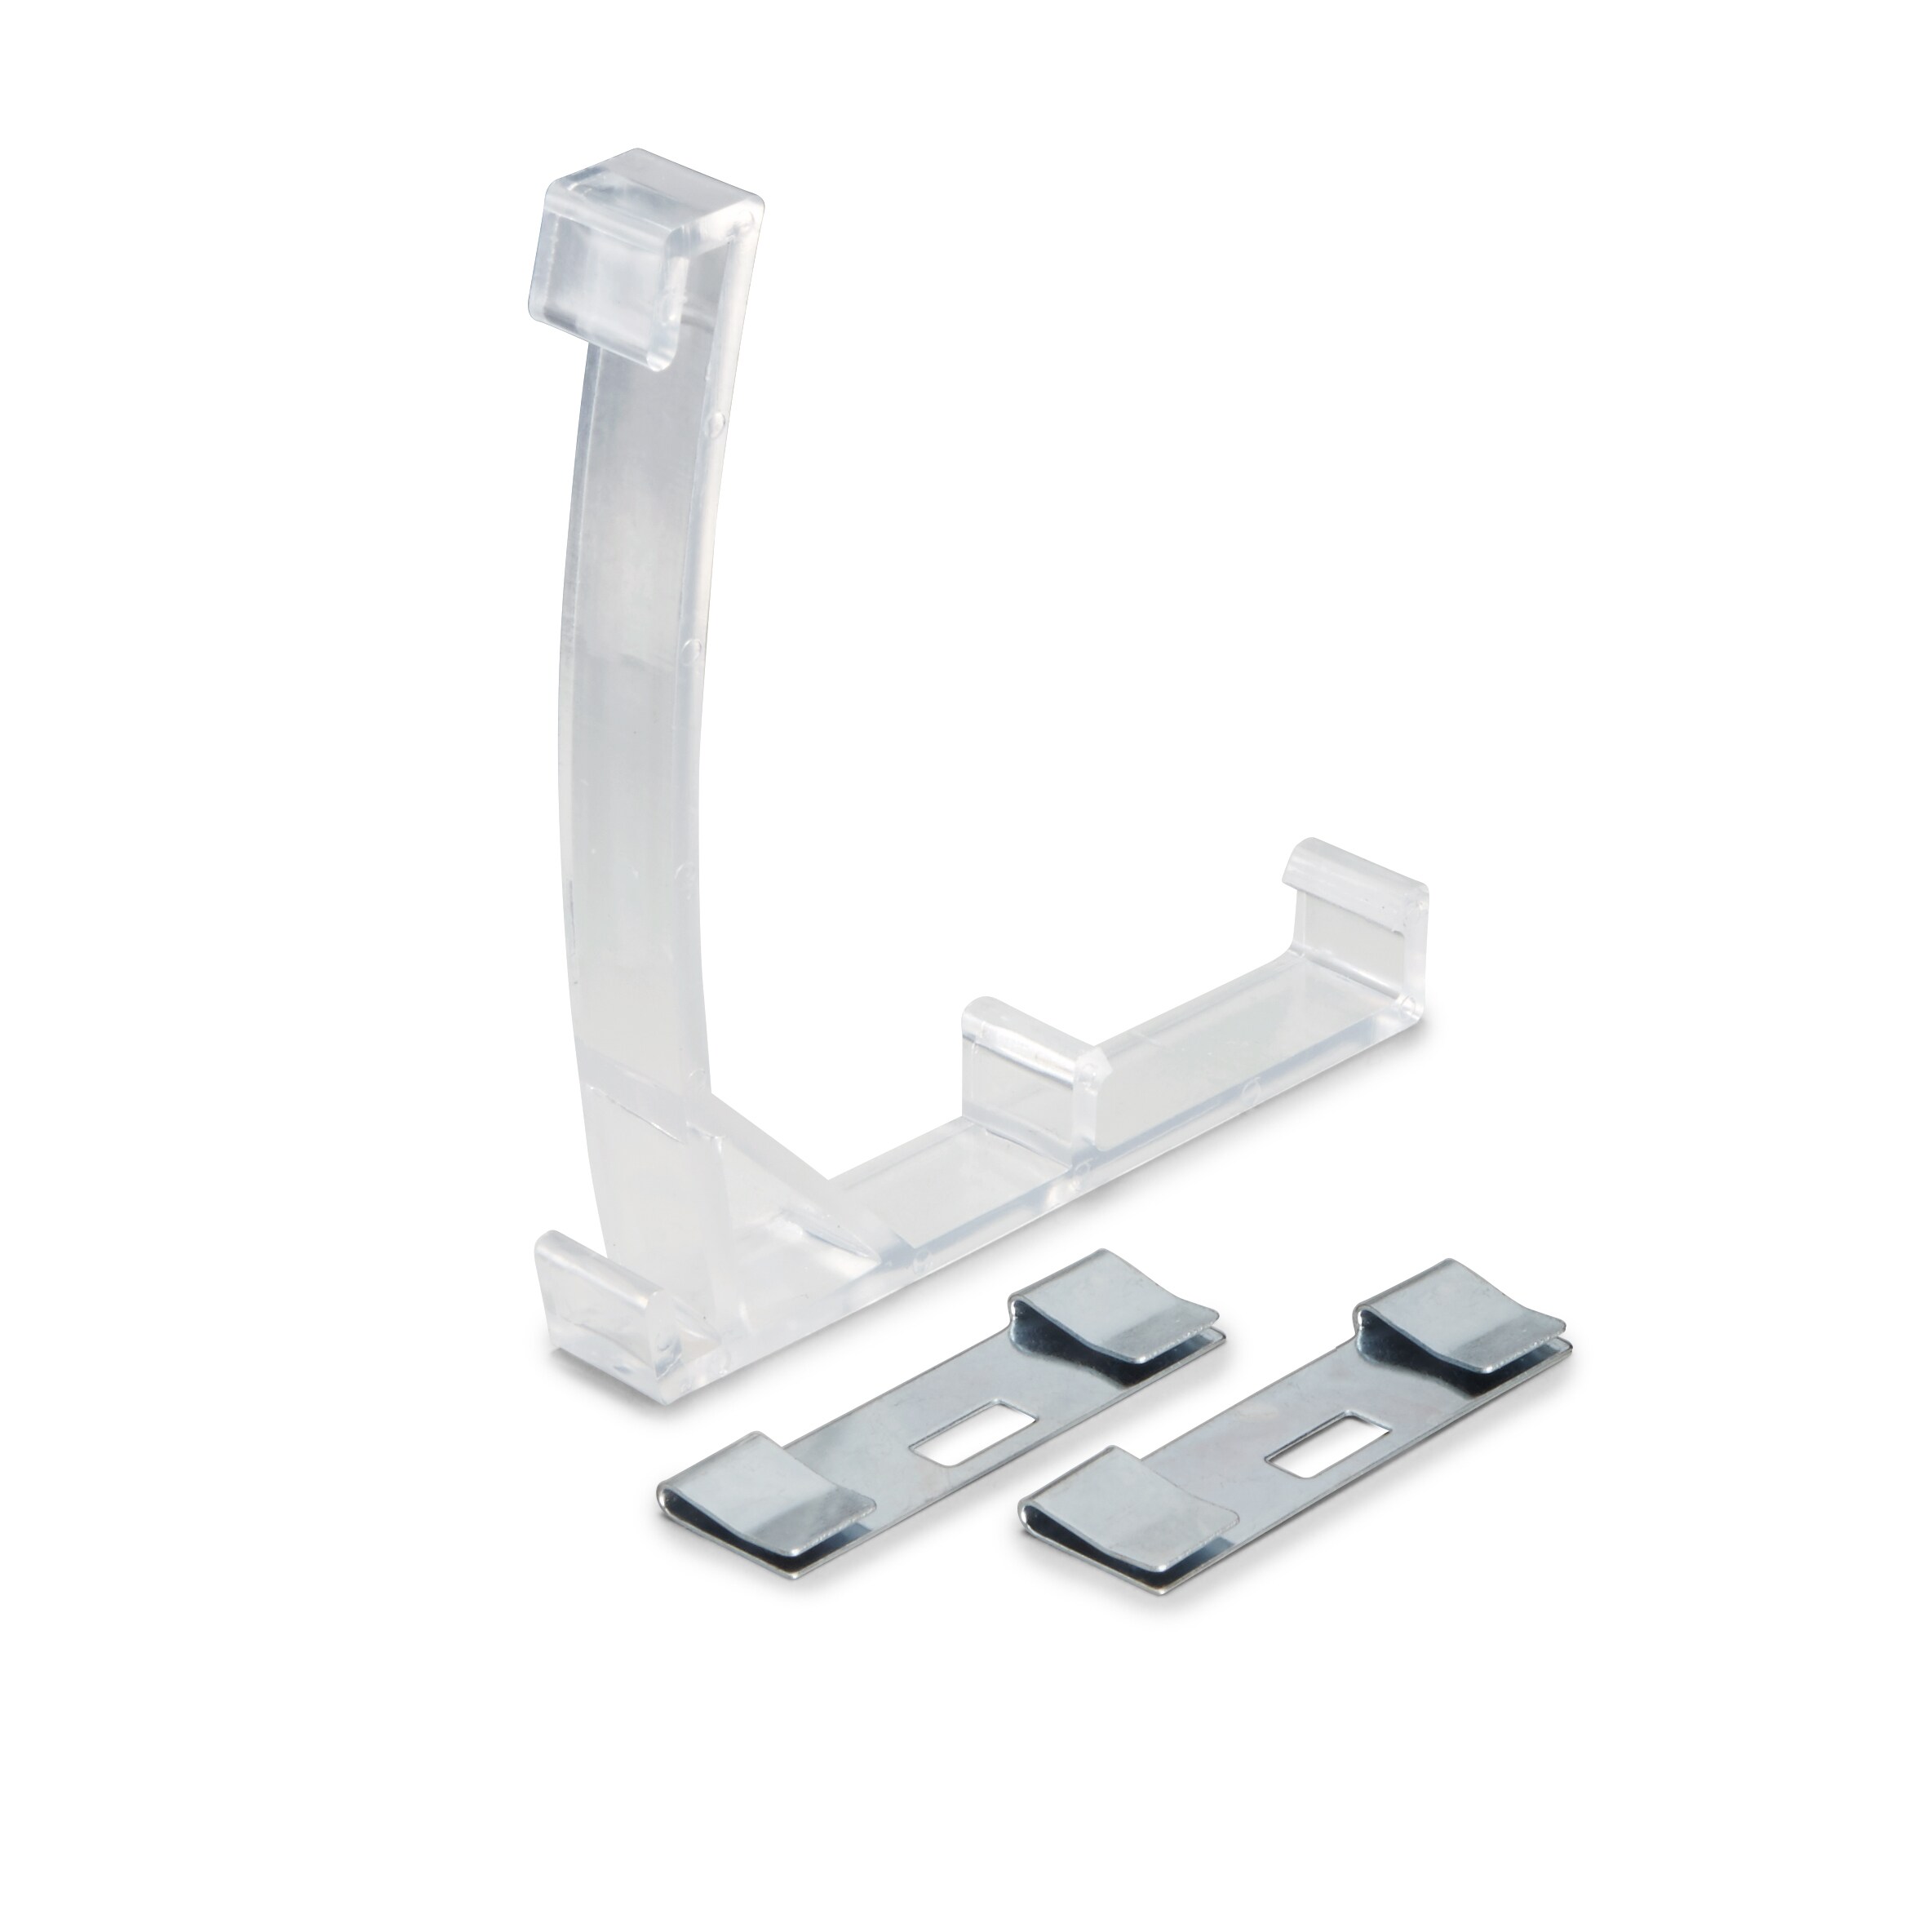 Fix Vertical PVC Blind Slats With This Two Pack Hole Reinforcement Vane Saver 